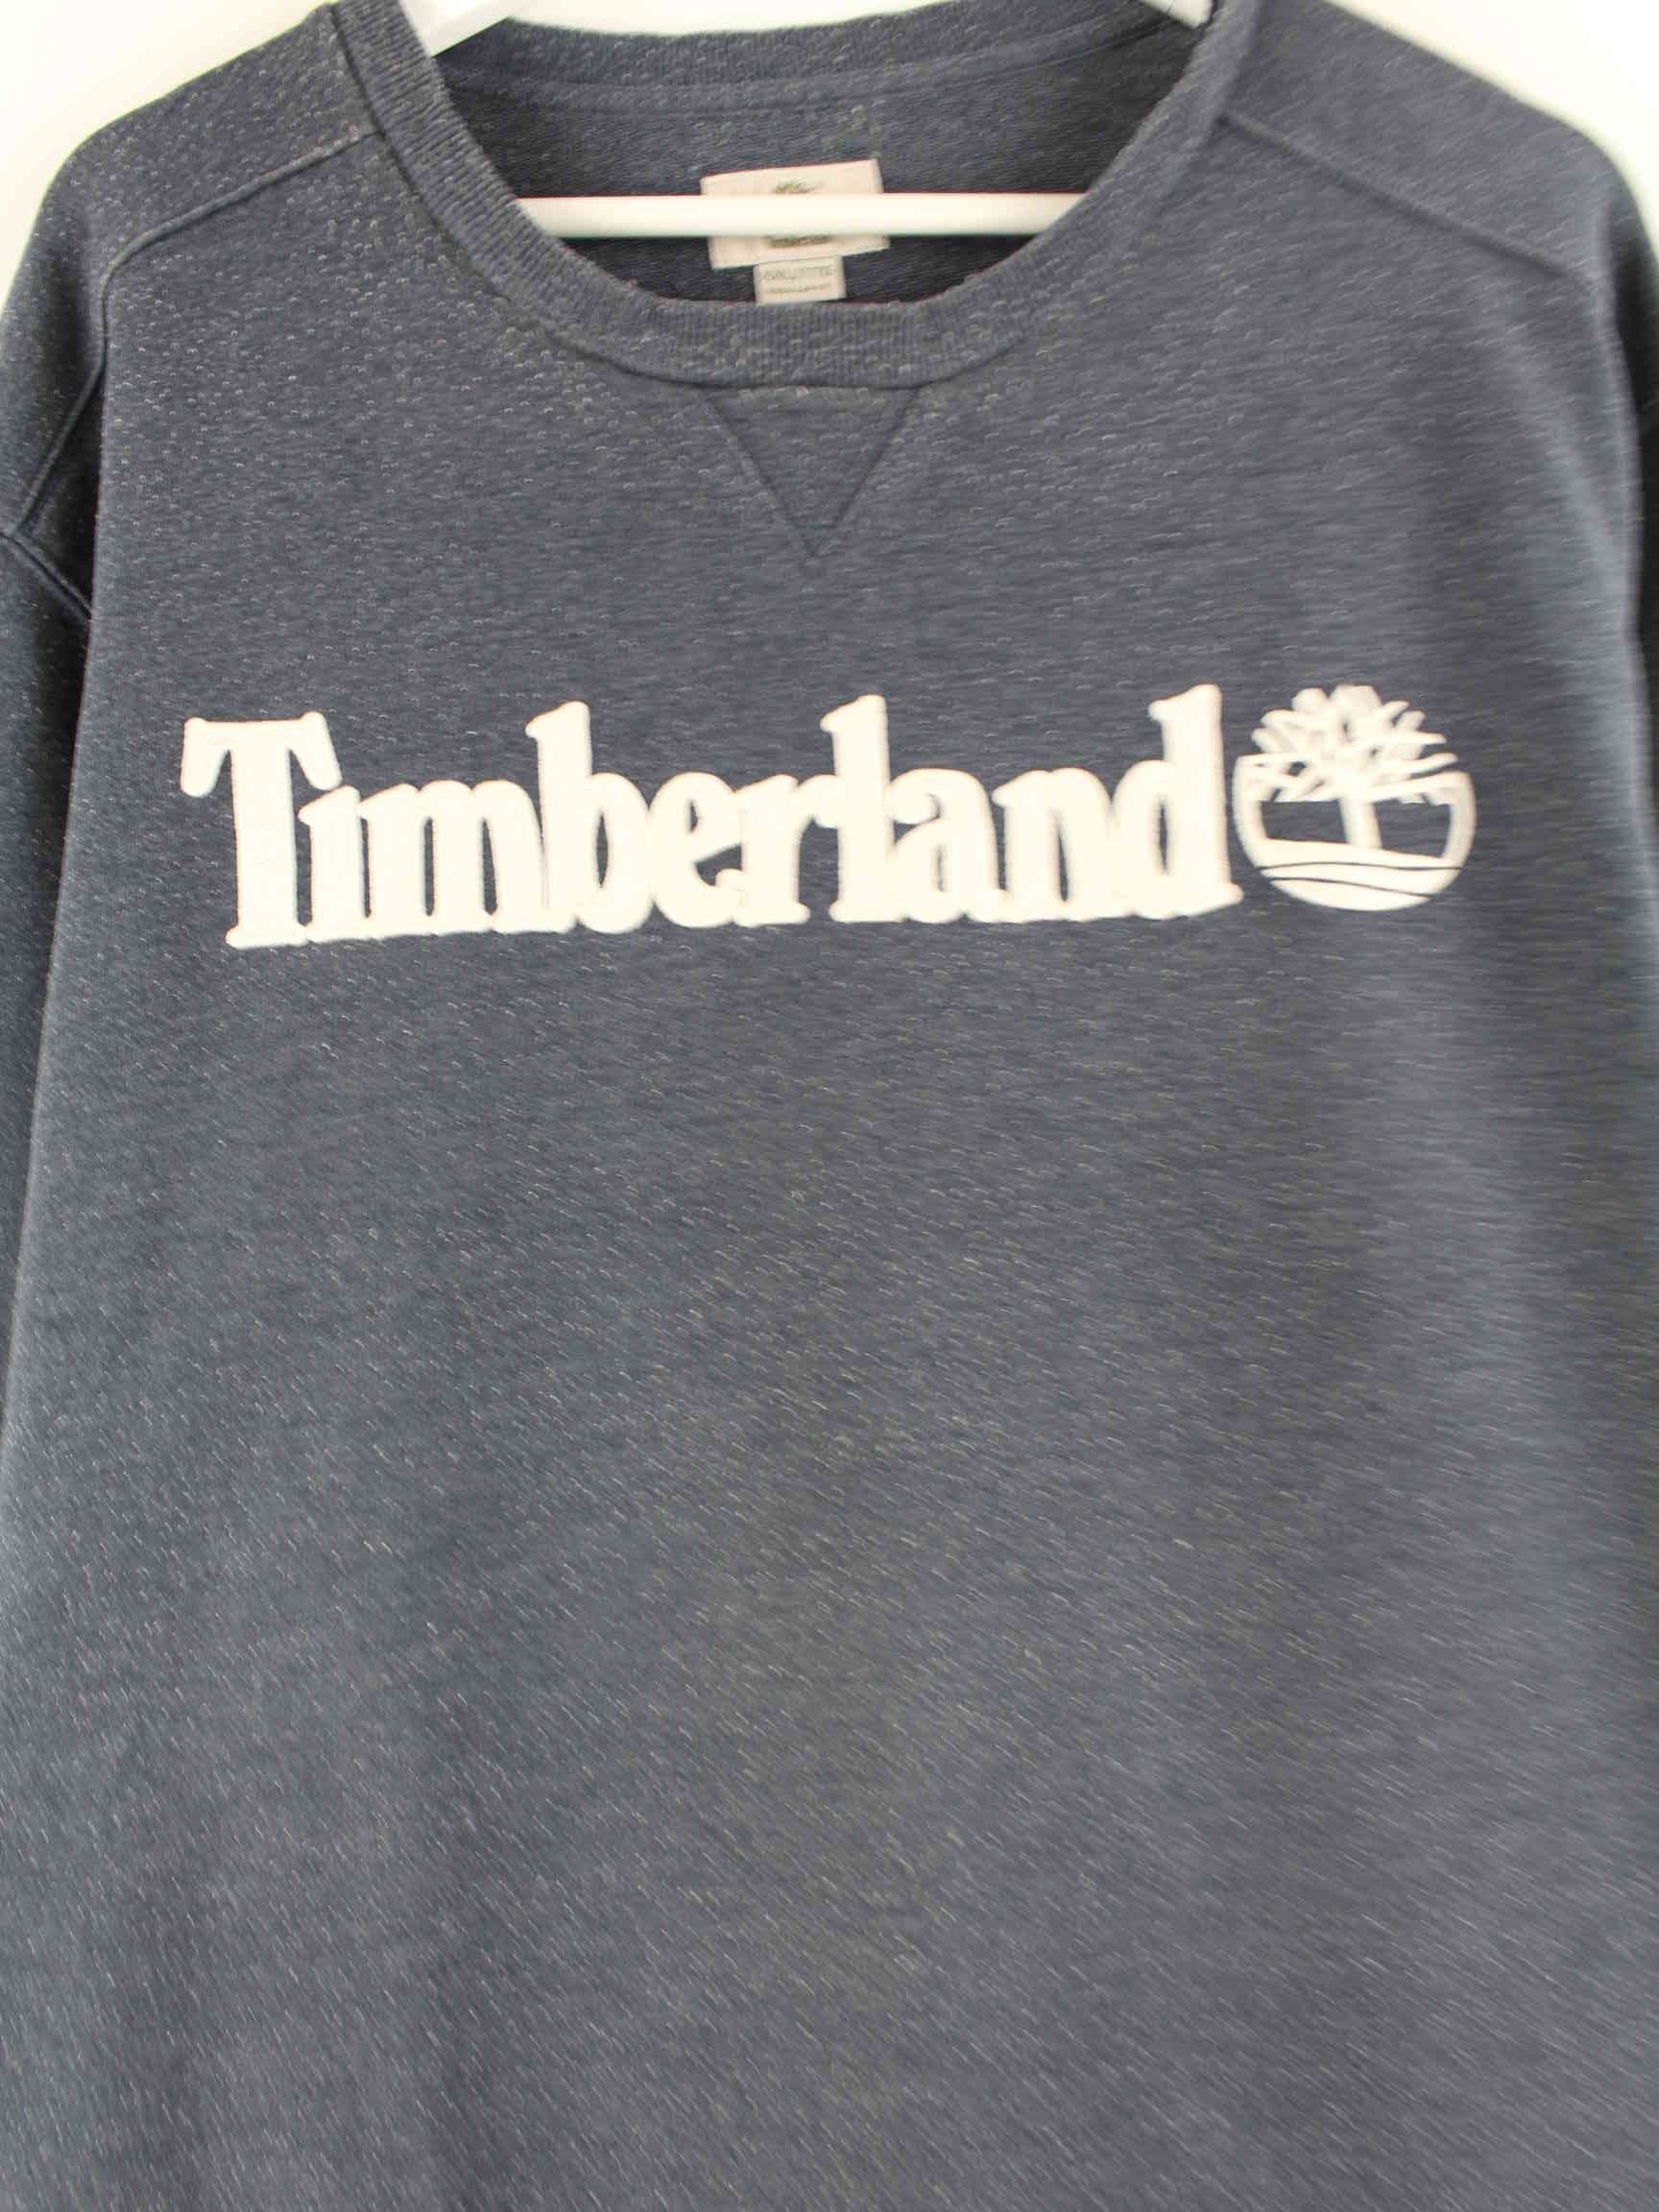 Timberland y2k Embroidered Logo Sweater Grau XXL (detail image 1)